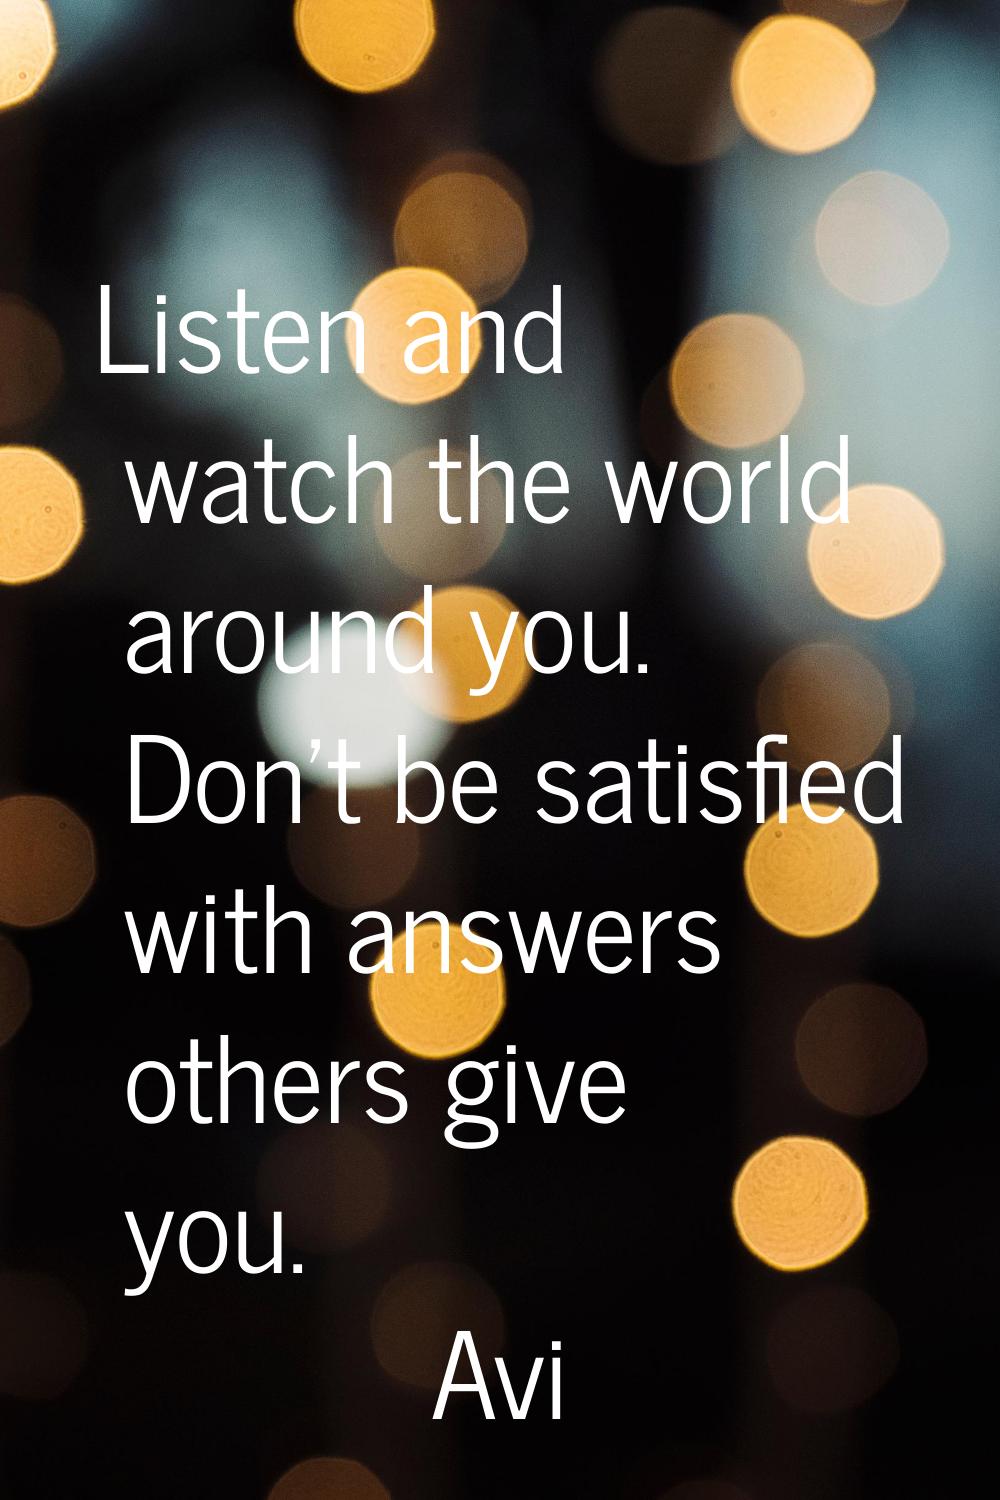 Listen and watch the world around you. Don't be satisfied with answers others give you.